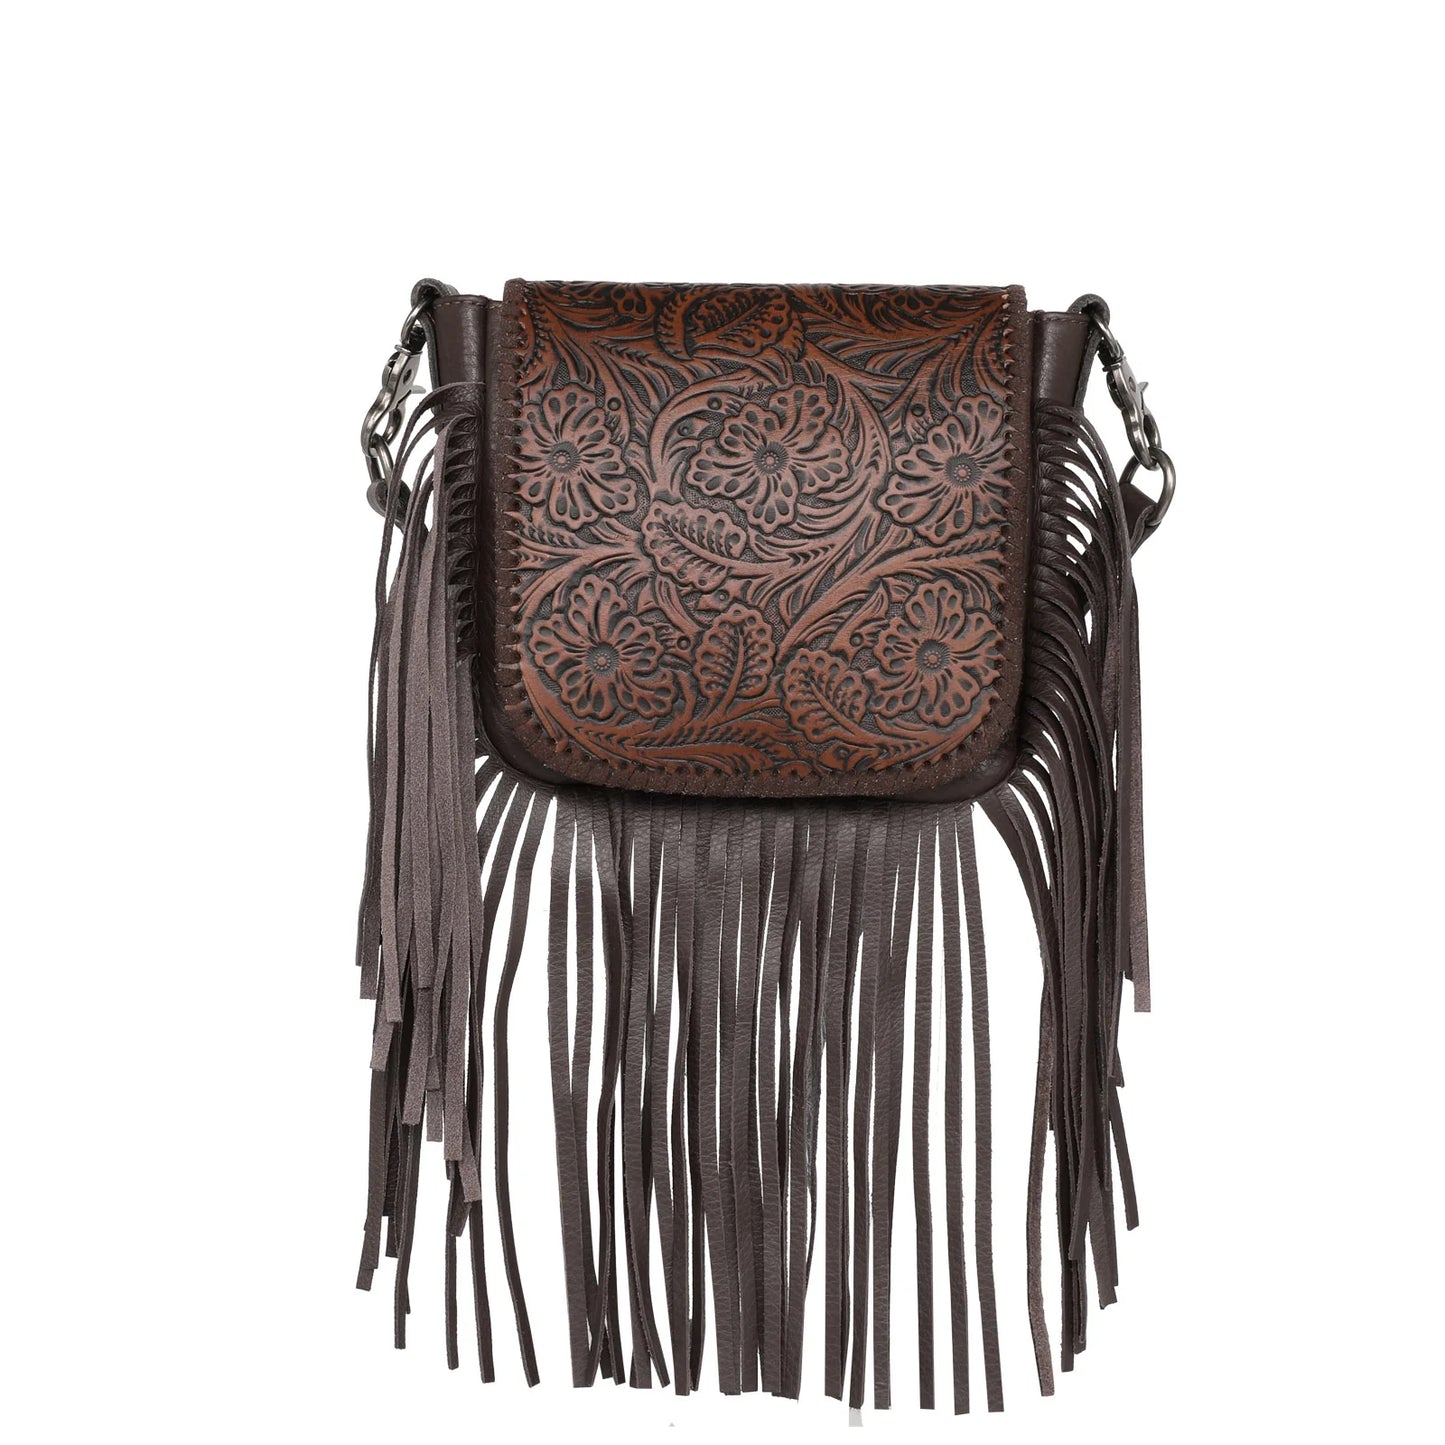 RLCL159 - Montana West Genuine Leather Tooled Collection Fringe Crossbody